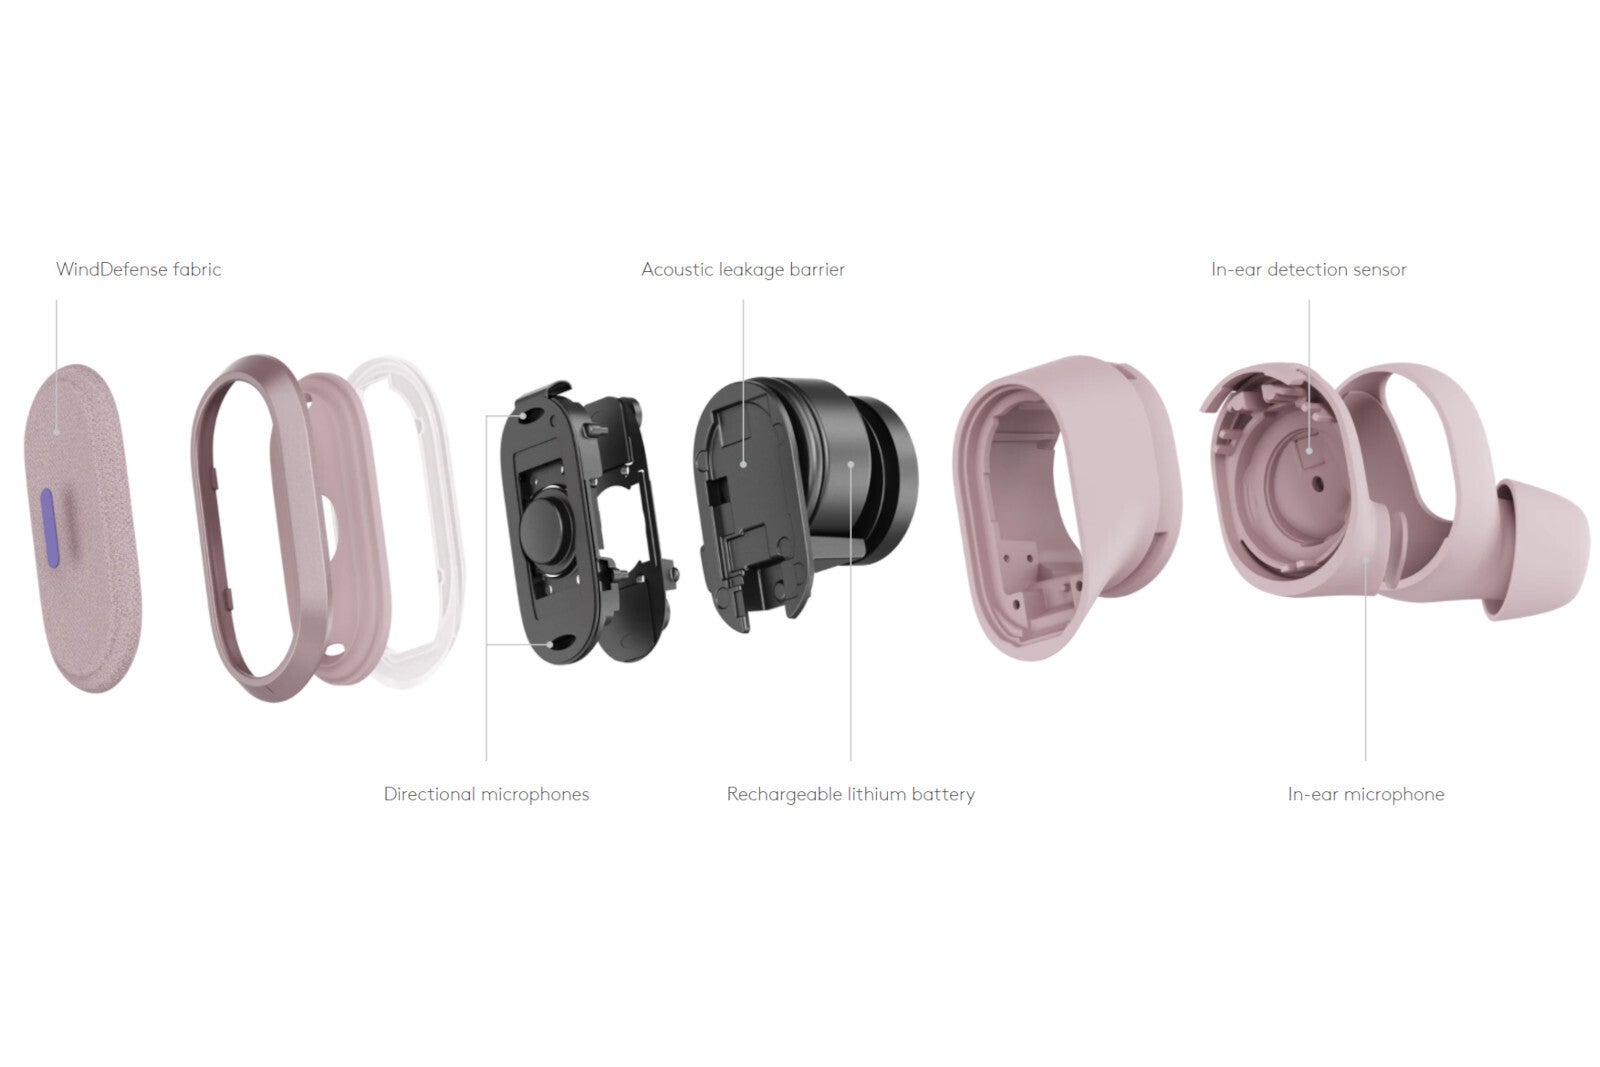 Logitech announces its first Zone True Wireless earbuds, and they have one special feature